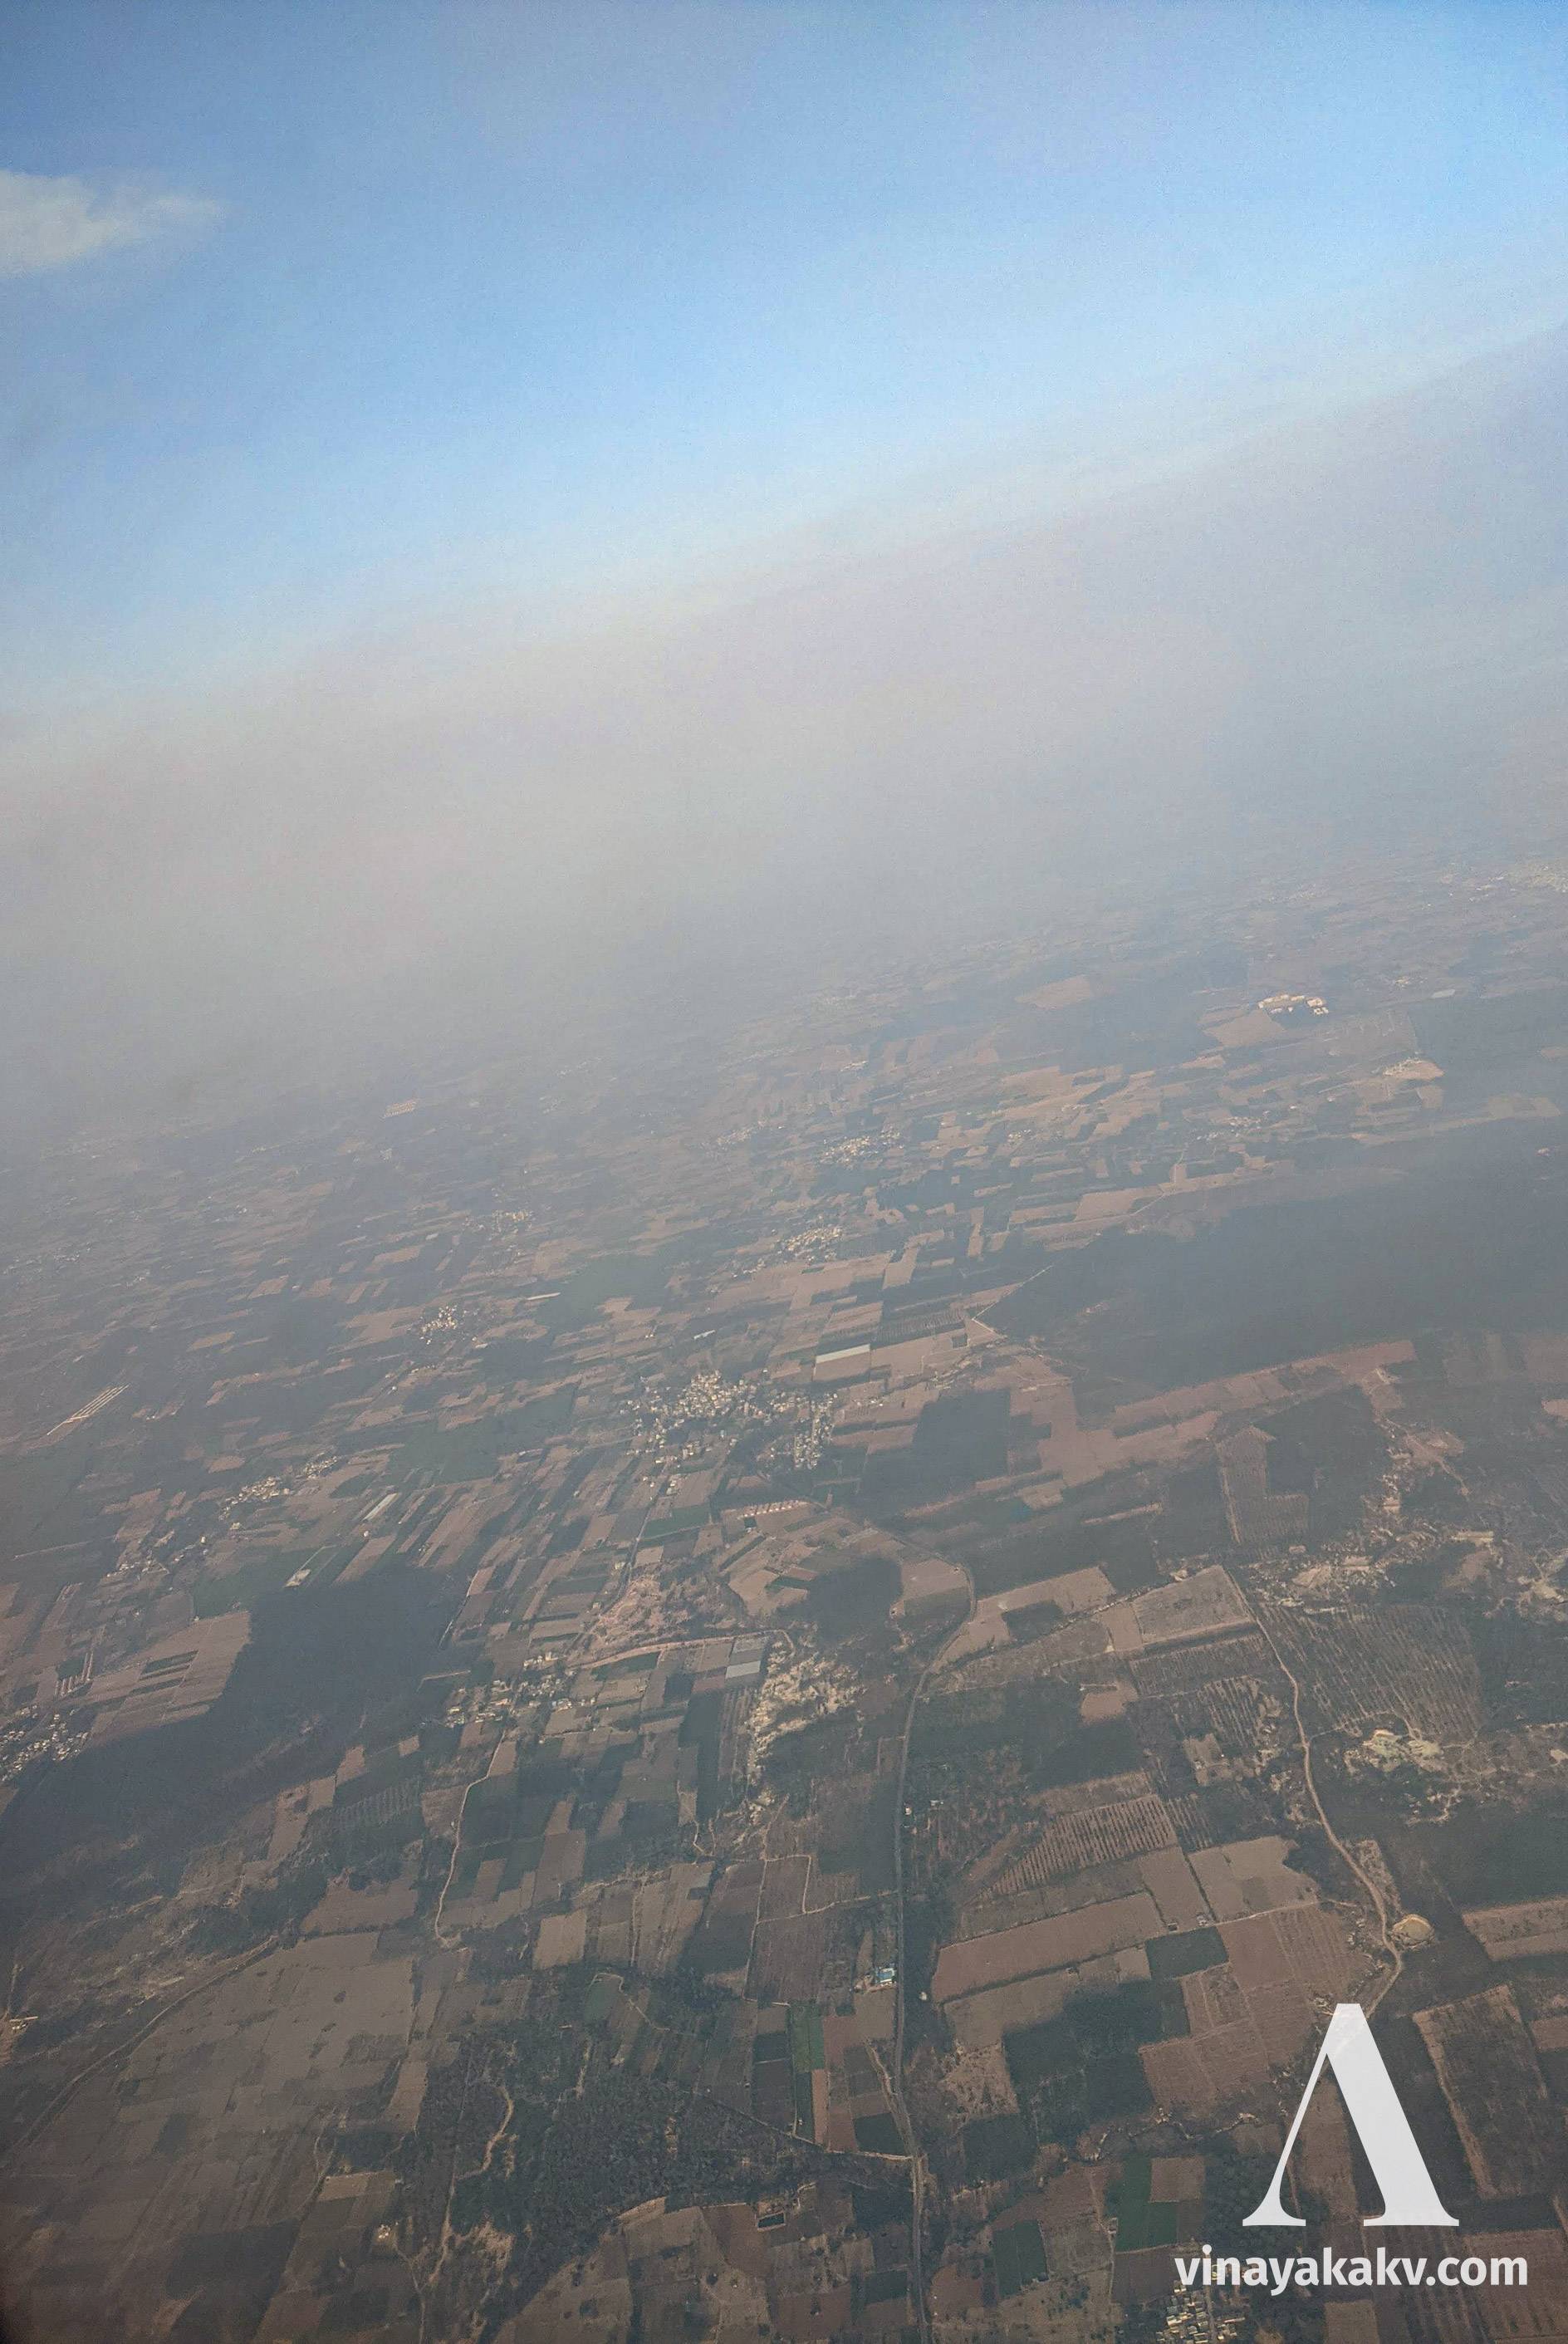 View from an airplane reaching upper haze layer during its ascent. The haze line can be seen as a brownish line at the top, with clear sky above.